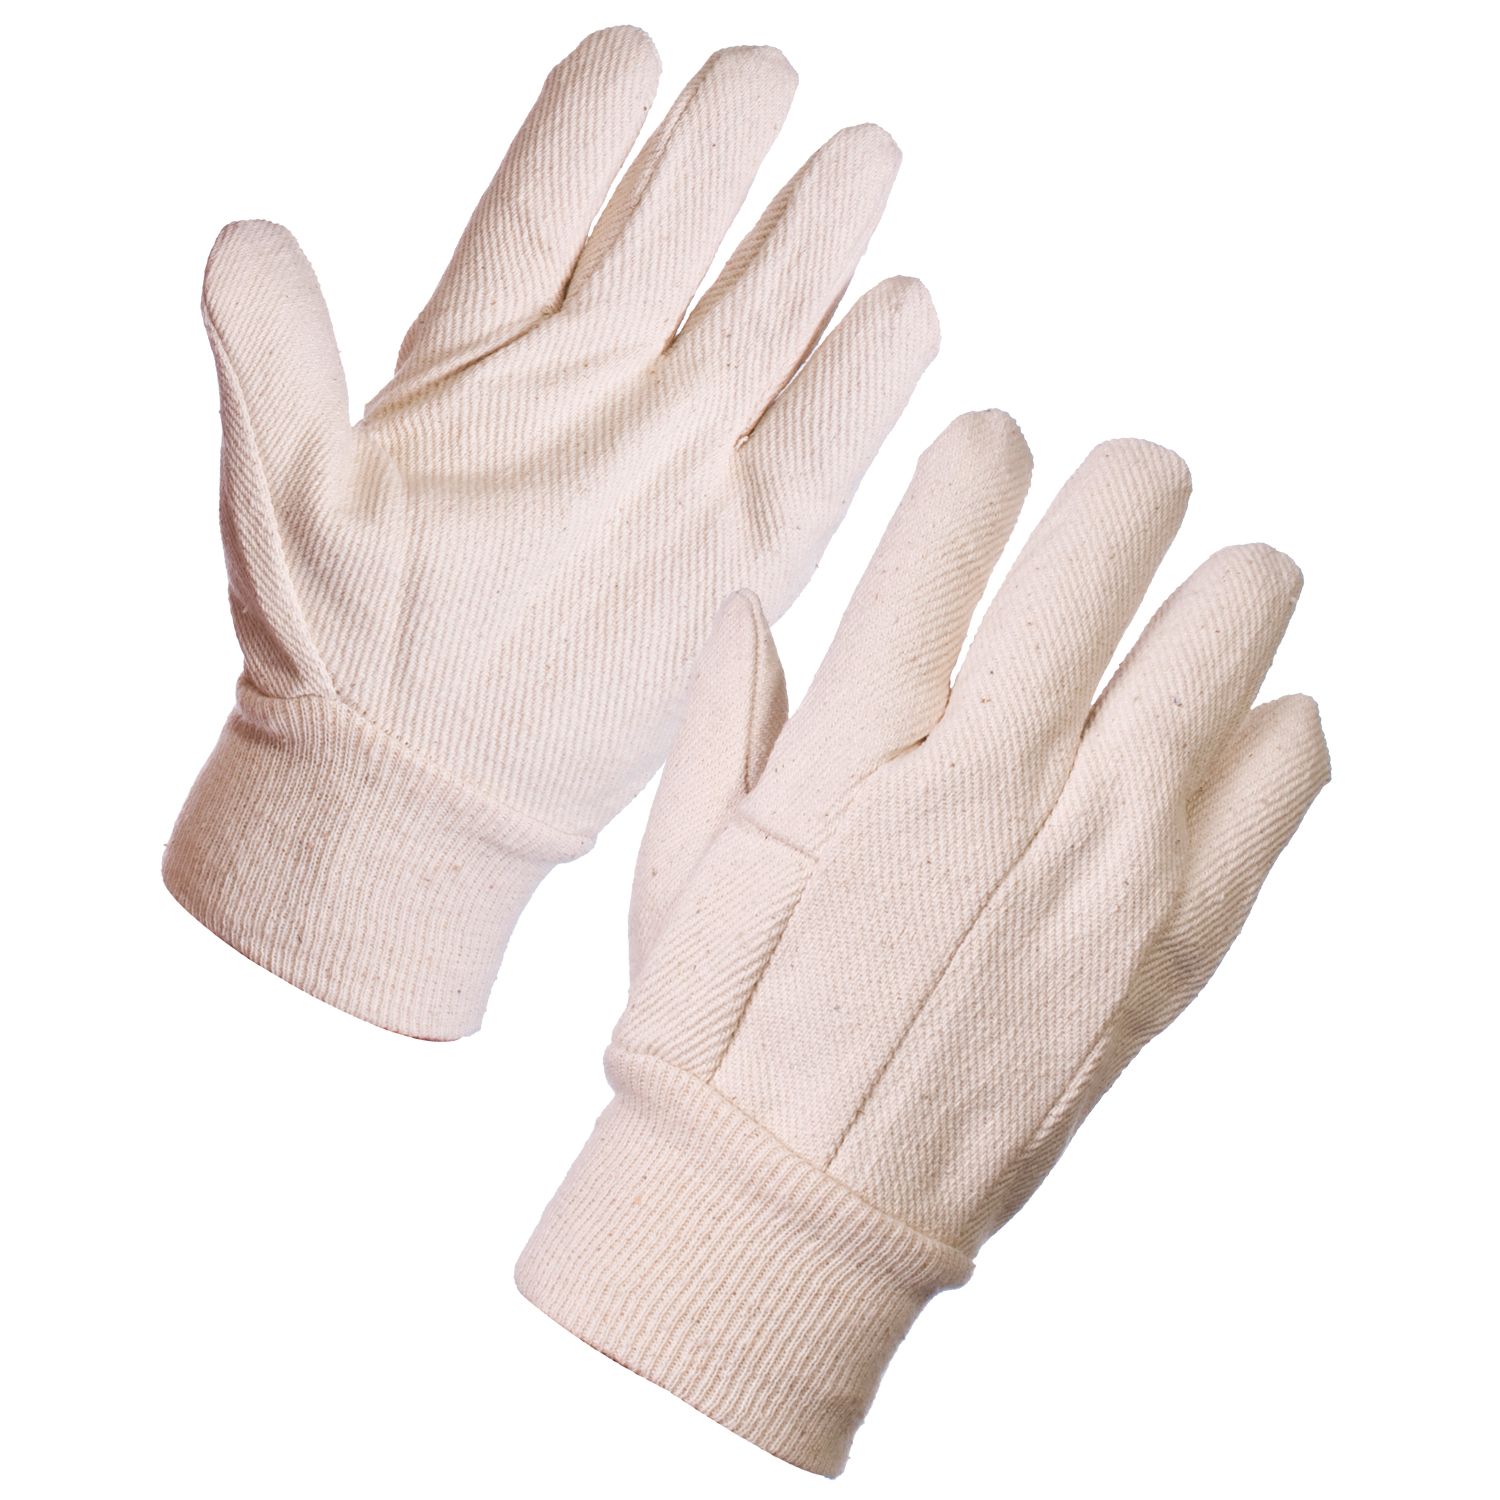 Durable Cotton Drill Gloves